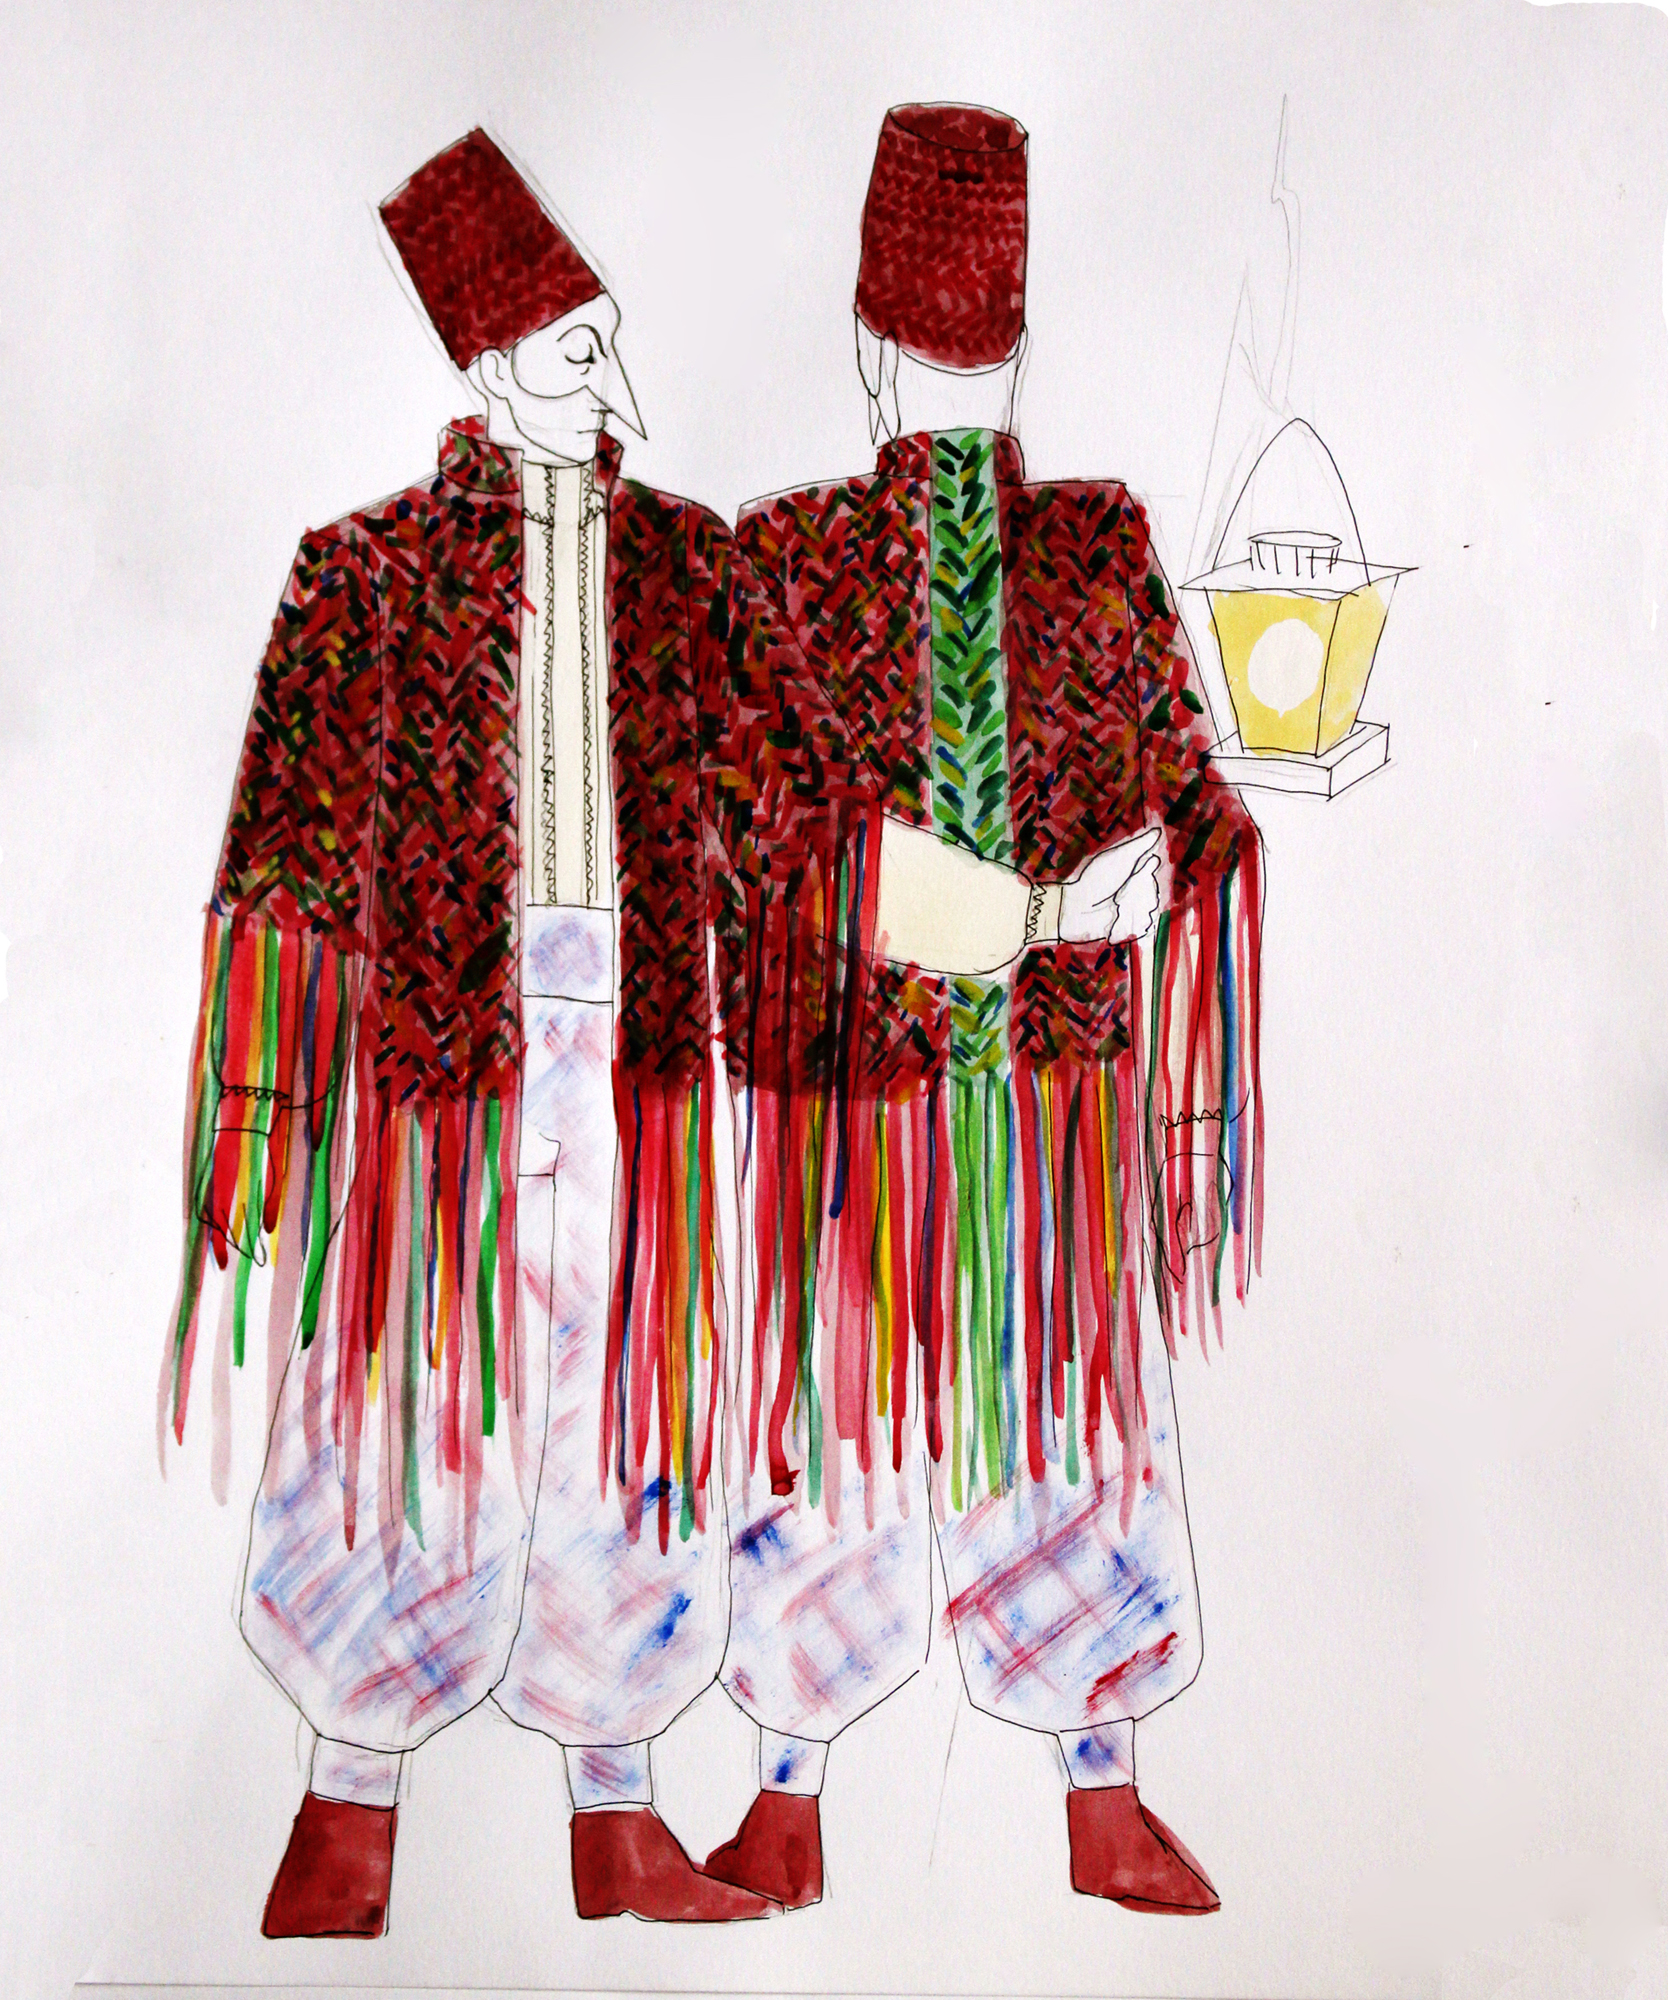 A watercolour illustration of the front and back side of a character. They wear puffy trousers in pale blue and red, a dark red jacket made out of braids, ending in a thick fringe at the sleeves and lower hem. Underneath the jacket is a light shirt. They are also wearing a fez-style hat and a mask with closed eyes and a long nose.